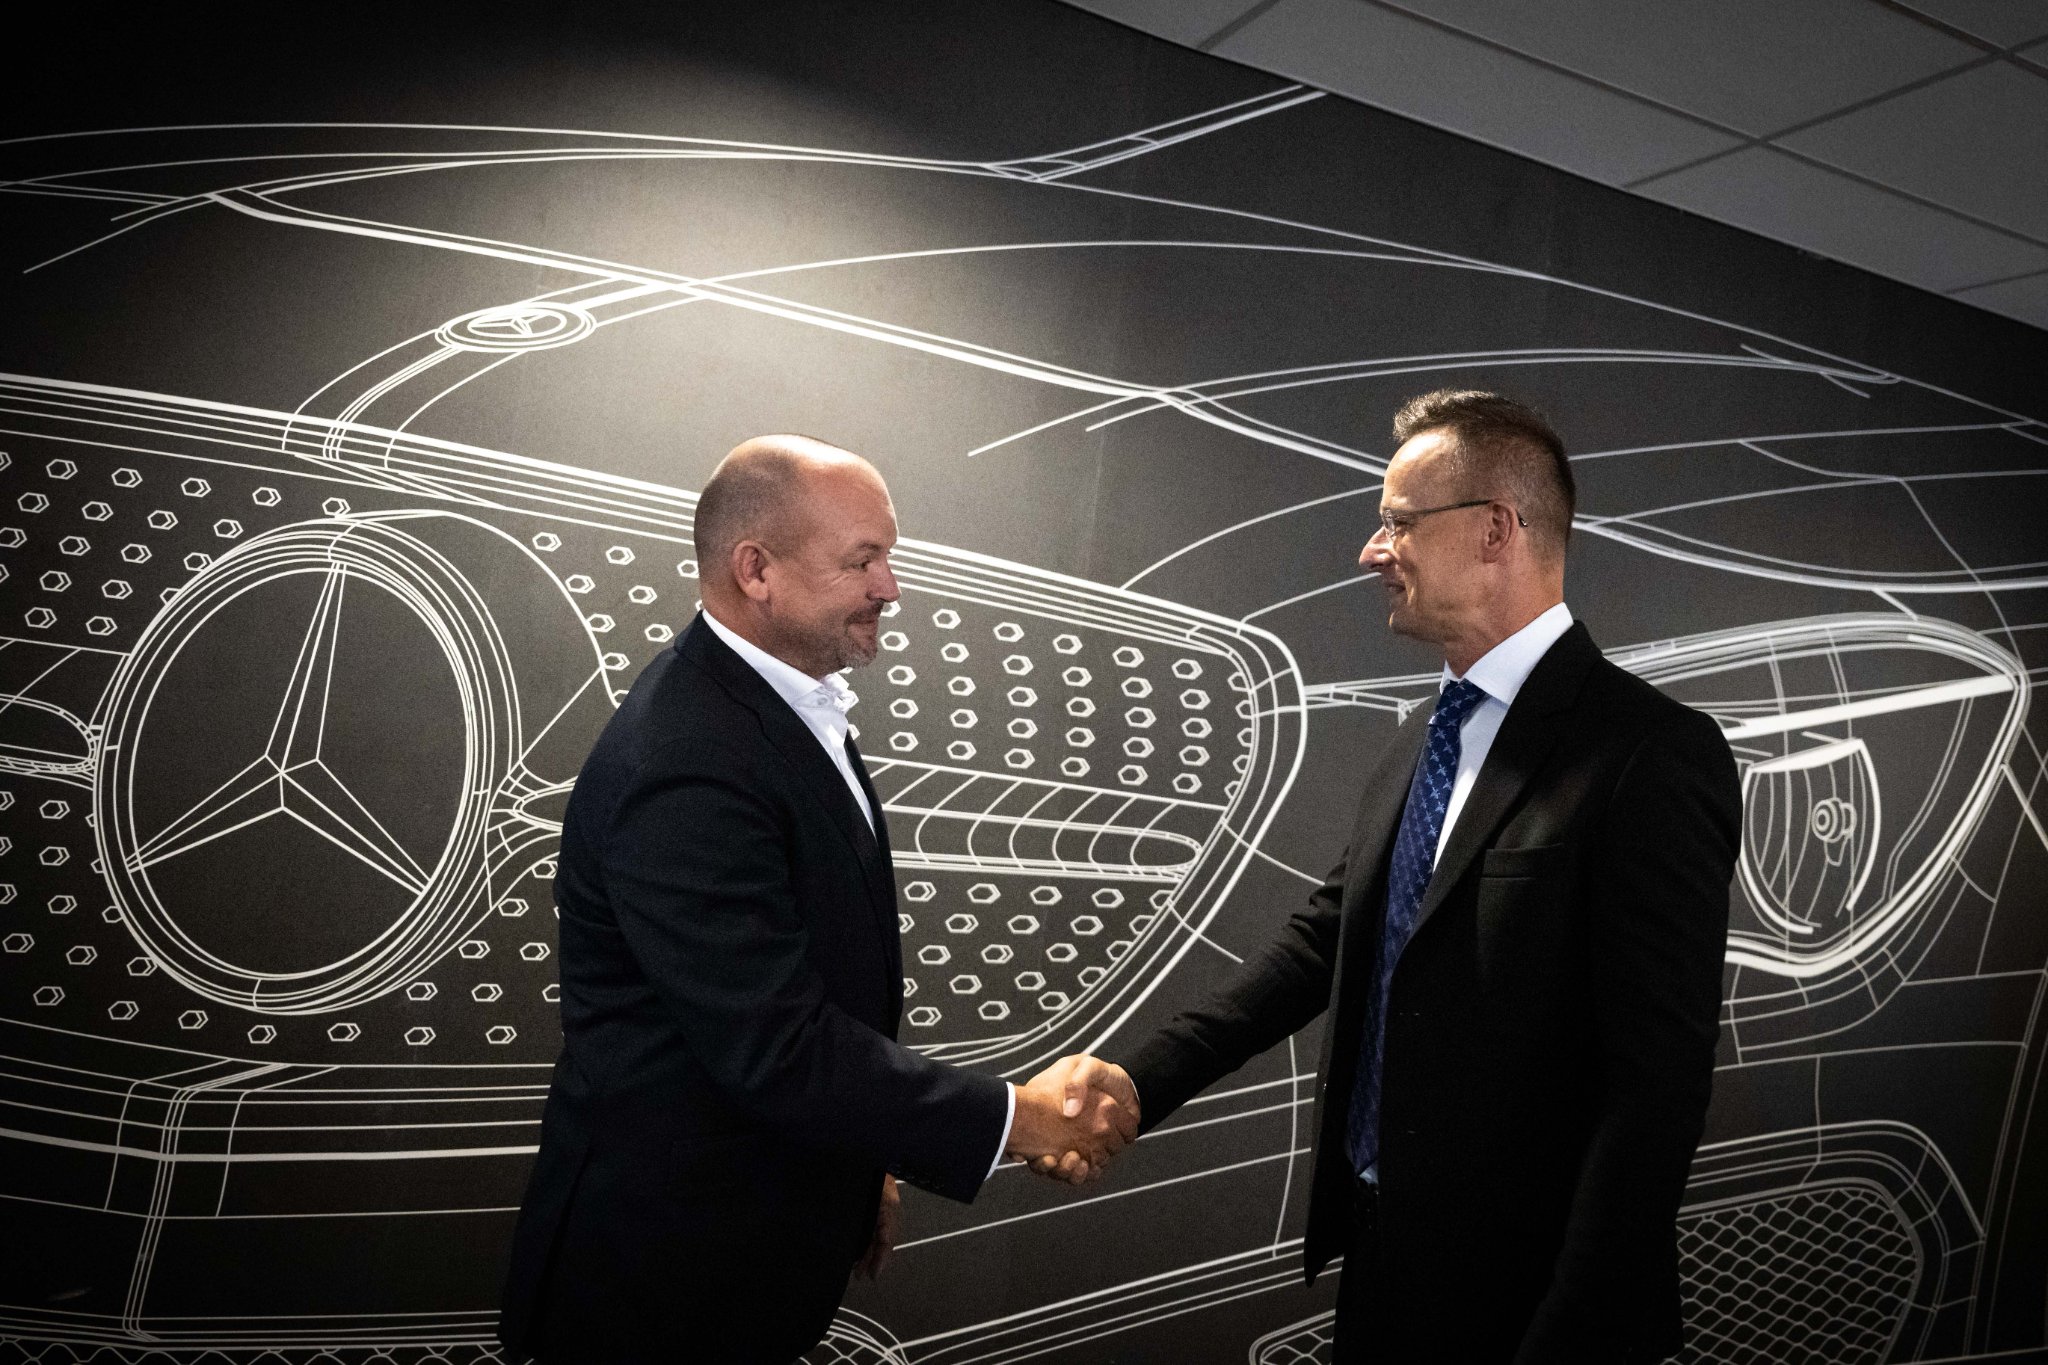 Szijjártó, Minister of Foreign Affairs: Mercedes will install new production lines in Kecskemét as part of a mega investment